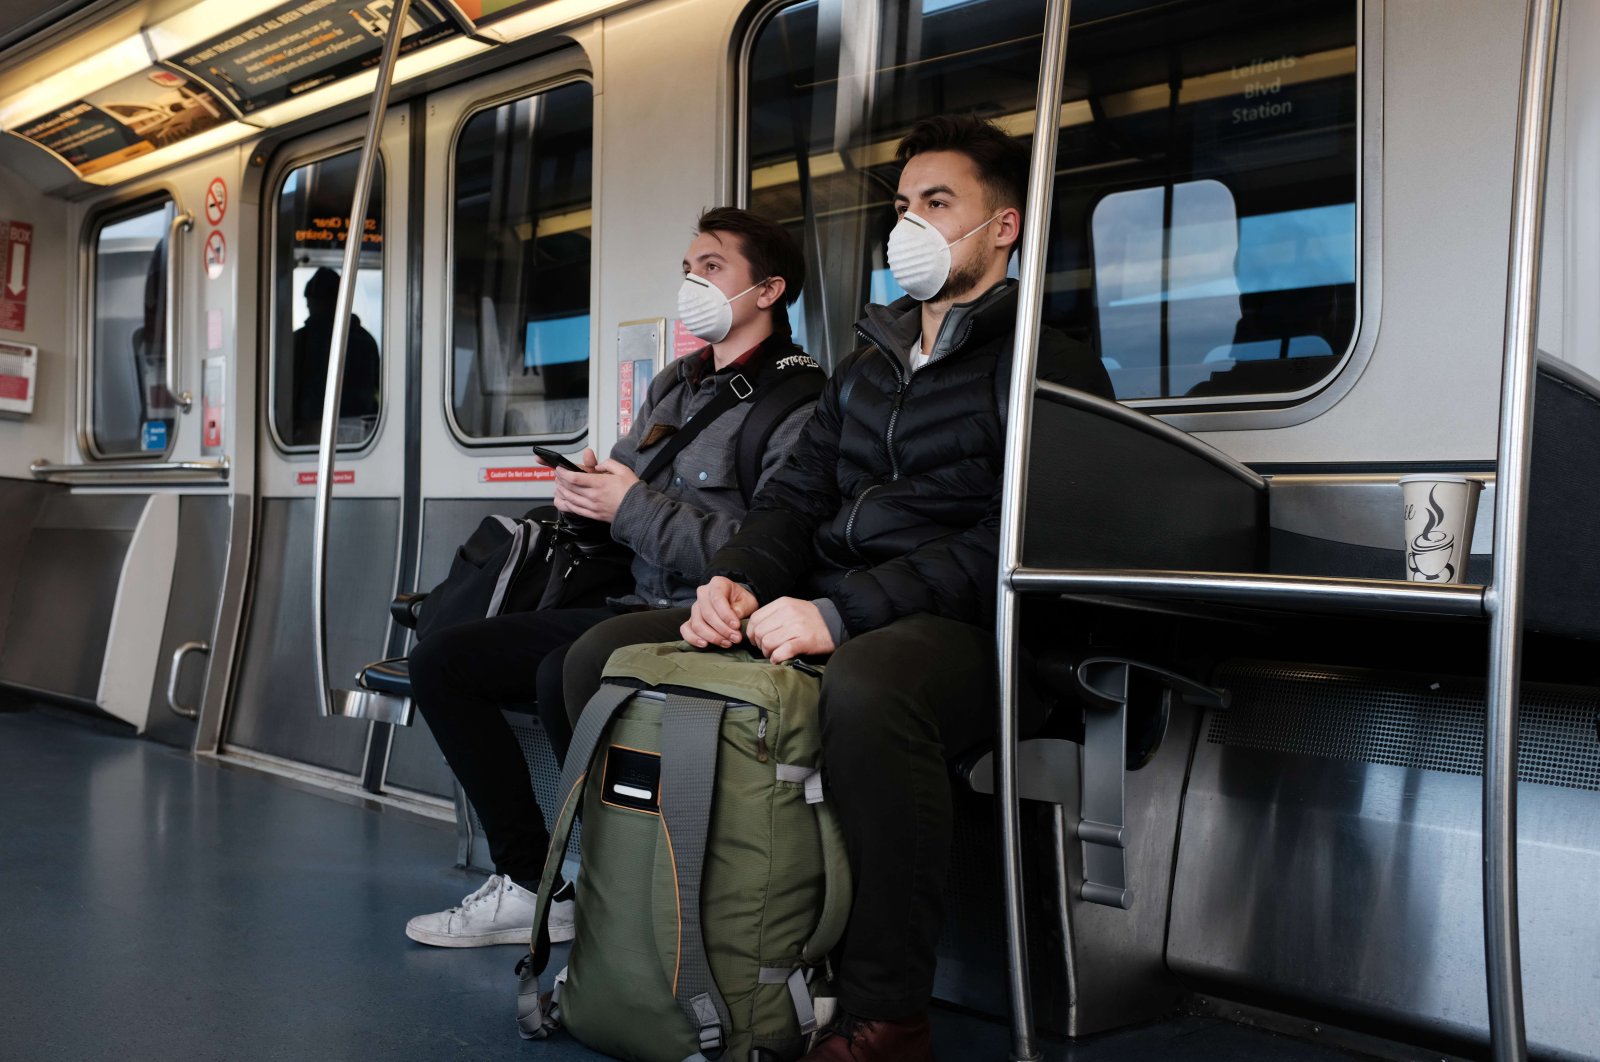  People wear medical masks on the AirTrain as concern over the coronavirus grows enroute to John F. Kennedy Airport (JFK) on March 7, 2020 in New York City. (AFP Photo)